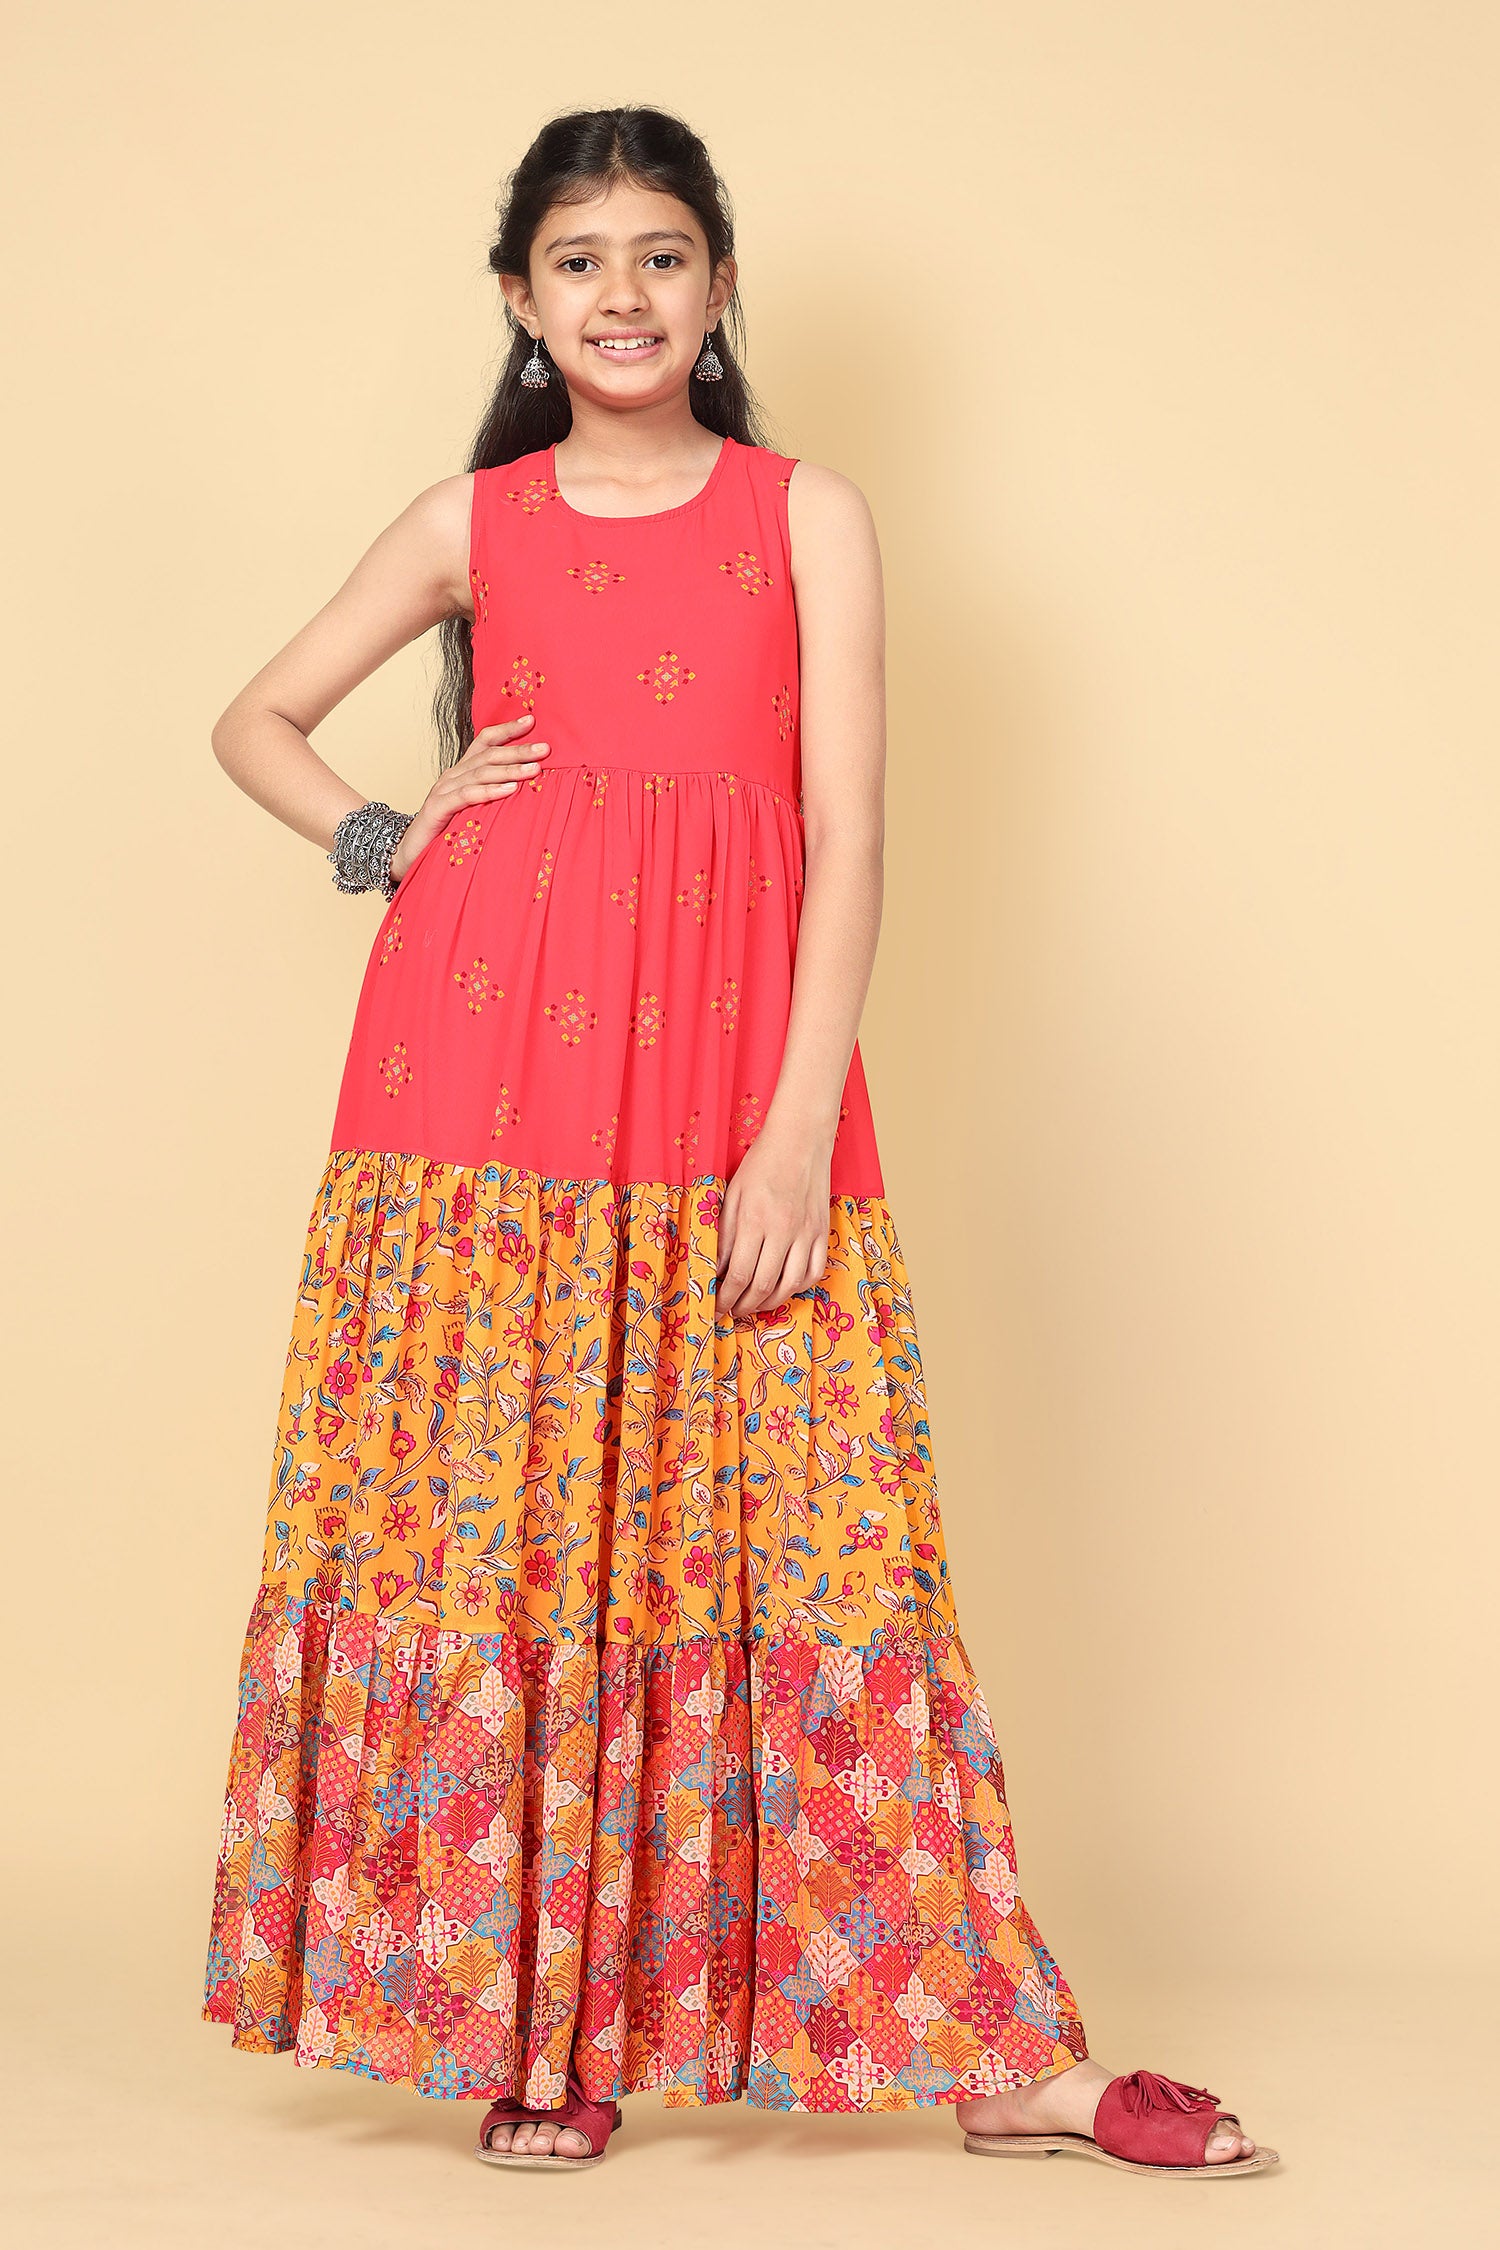 Biba kids' maxi & long dresses, compare prices and buy online